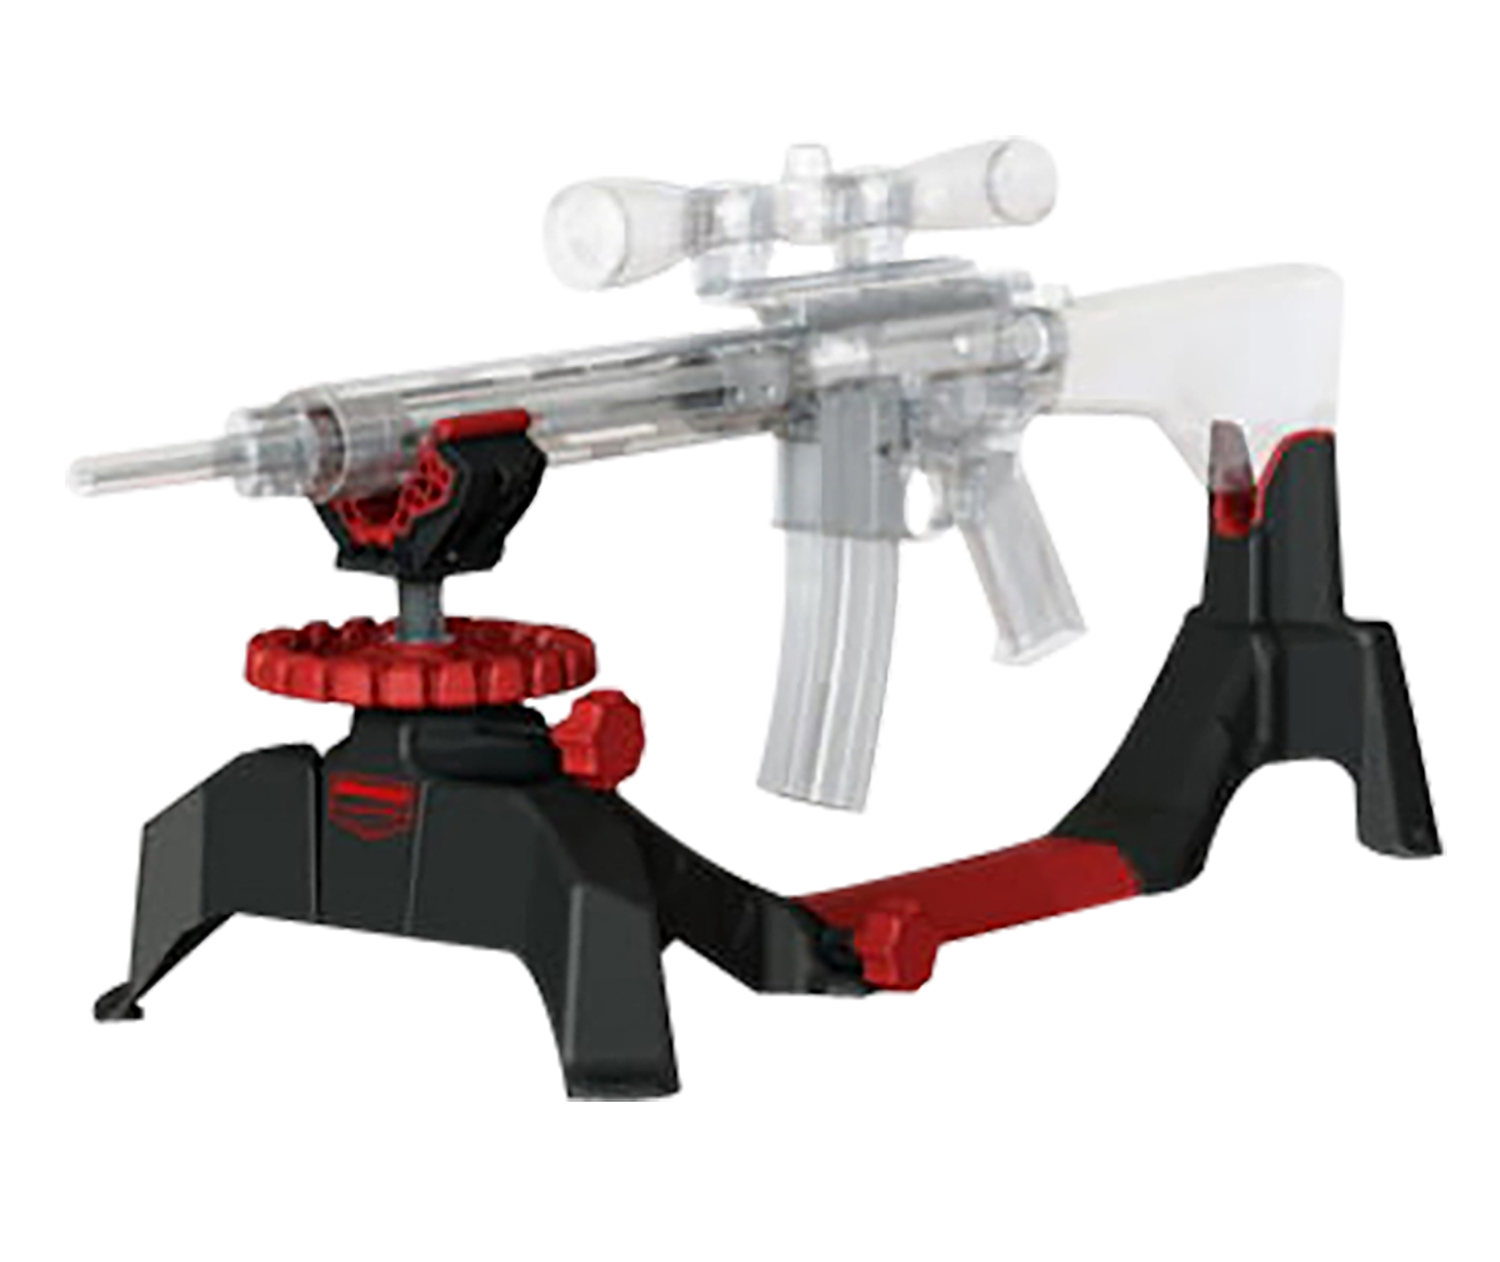 Birchwood Casey CSR Foxtrot Shooting Rest made of Black Non-Marring Material with Red Accents, Adjustable Elevation & Removeable Center Section for Pistols & Rifles